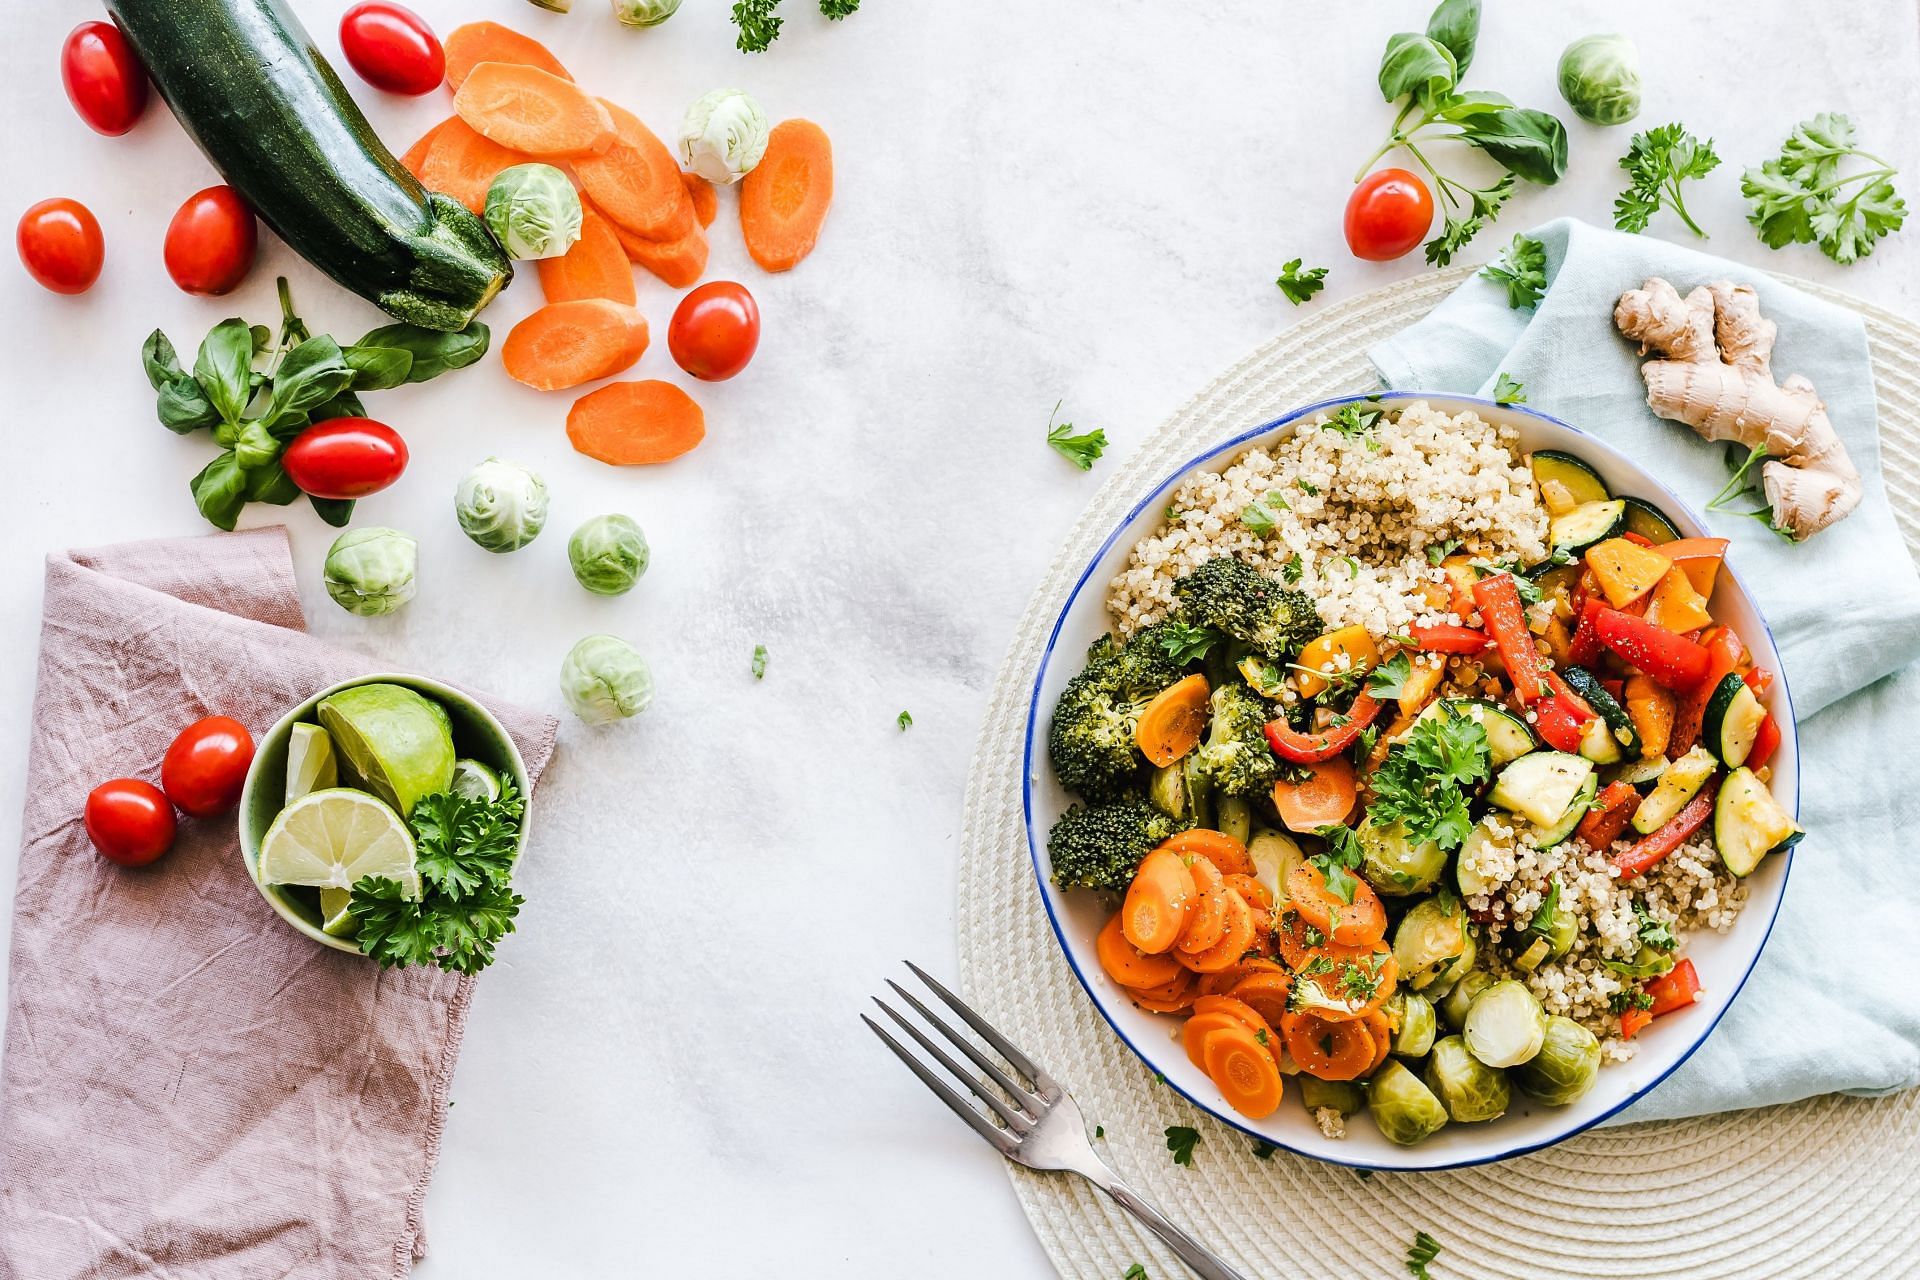 A variety of plant foods and vegetables help nourish your gut microbiome. (Image via Pexels @Ella Olsson)